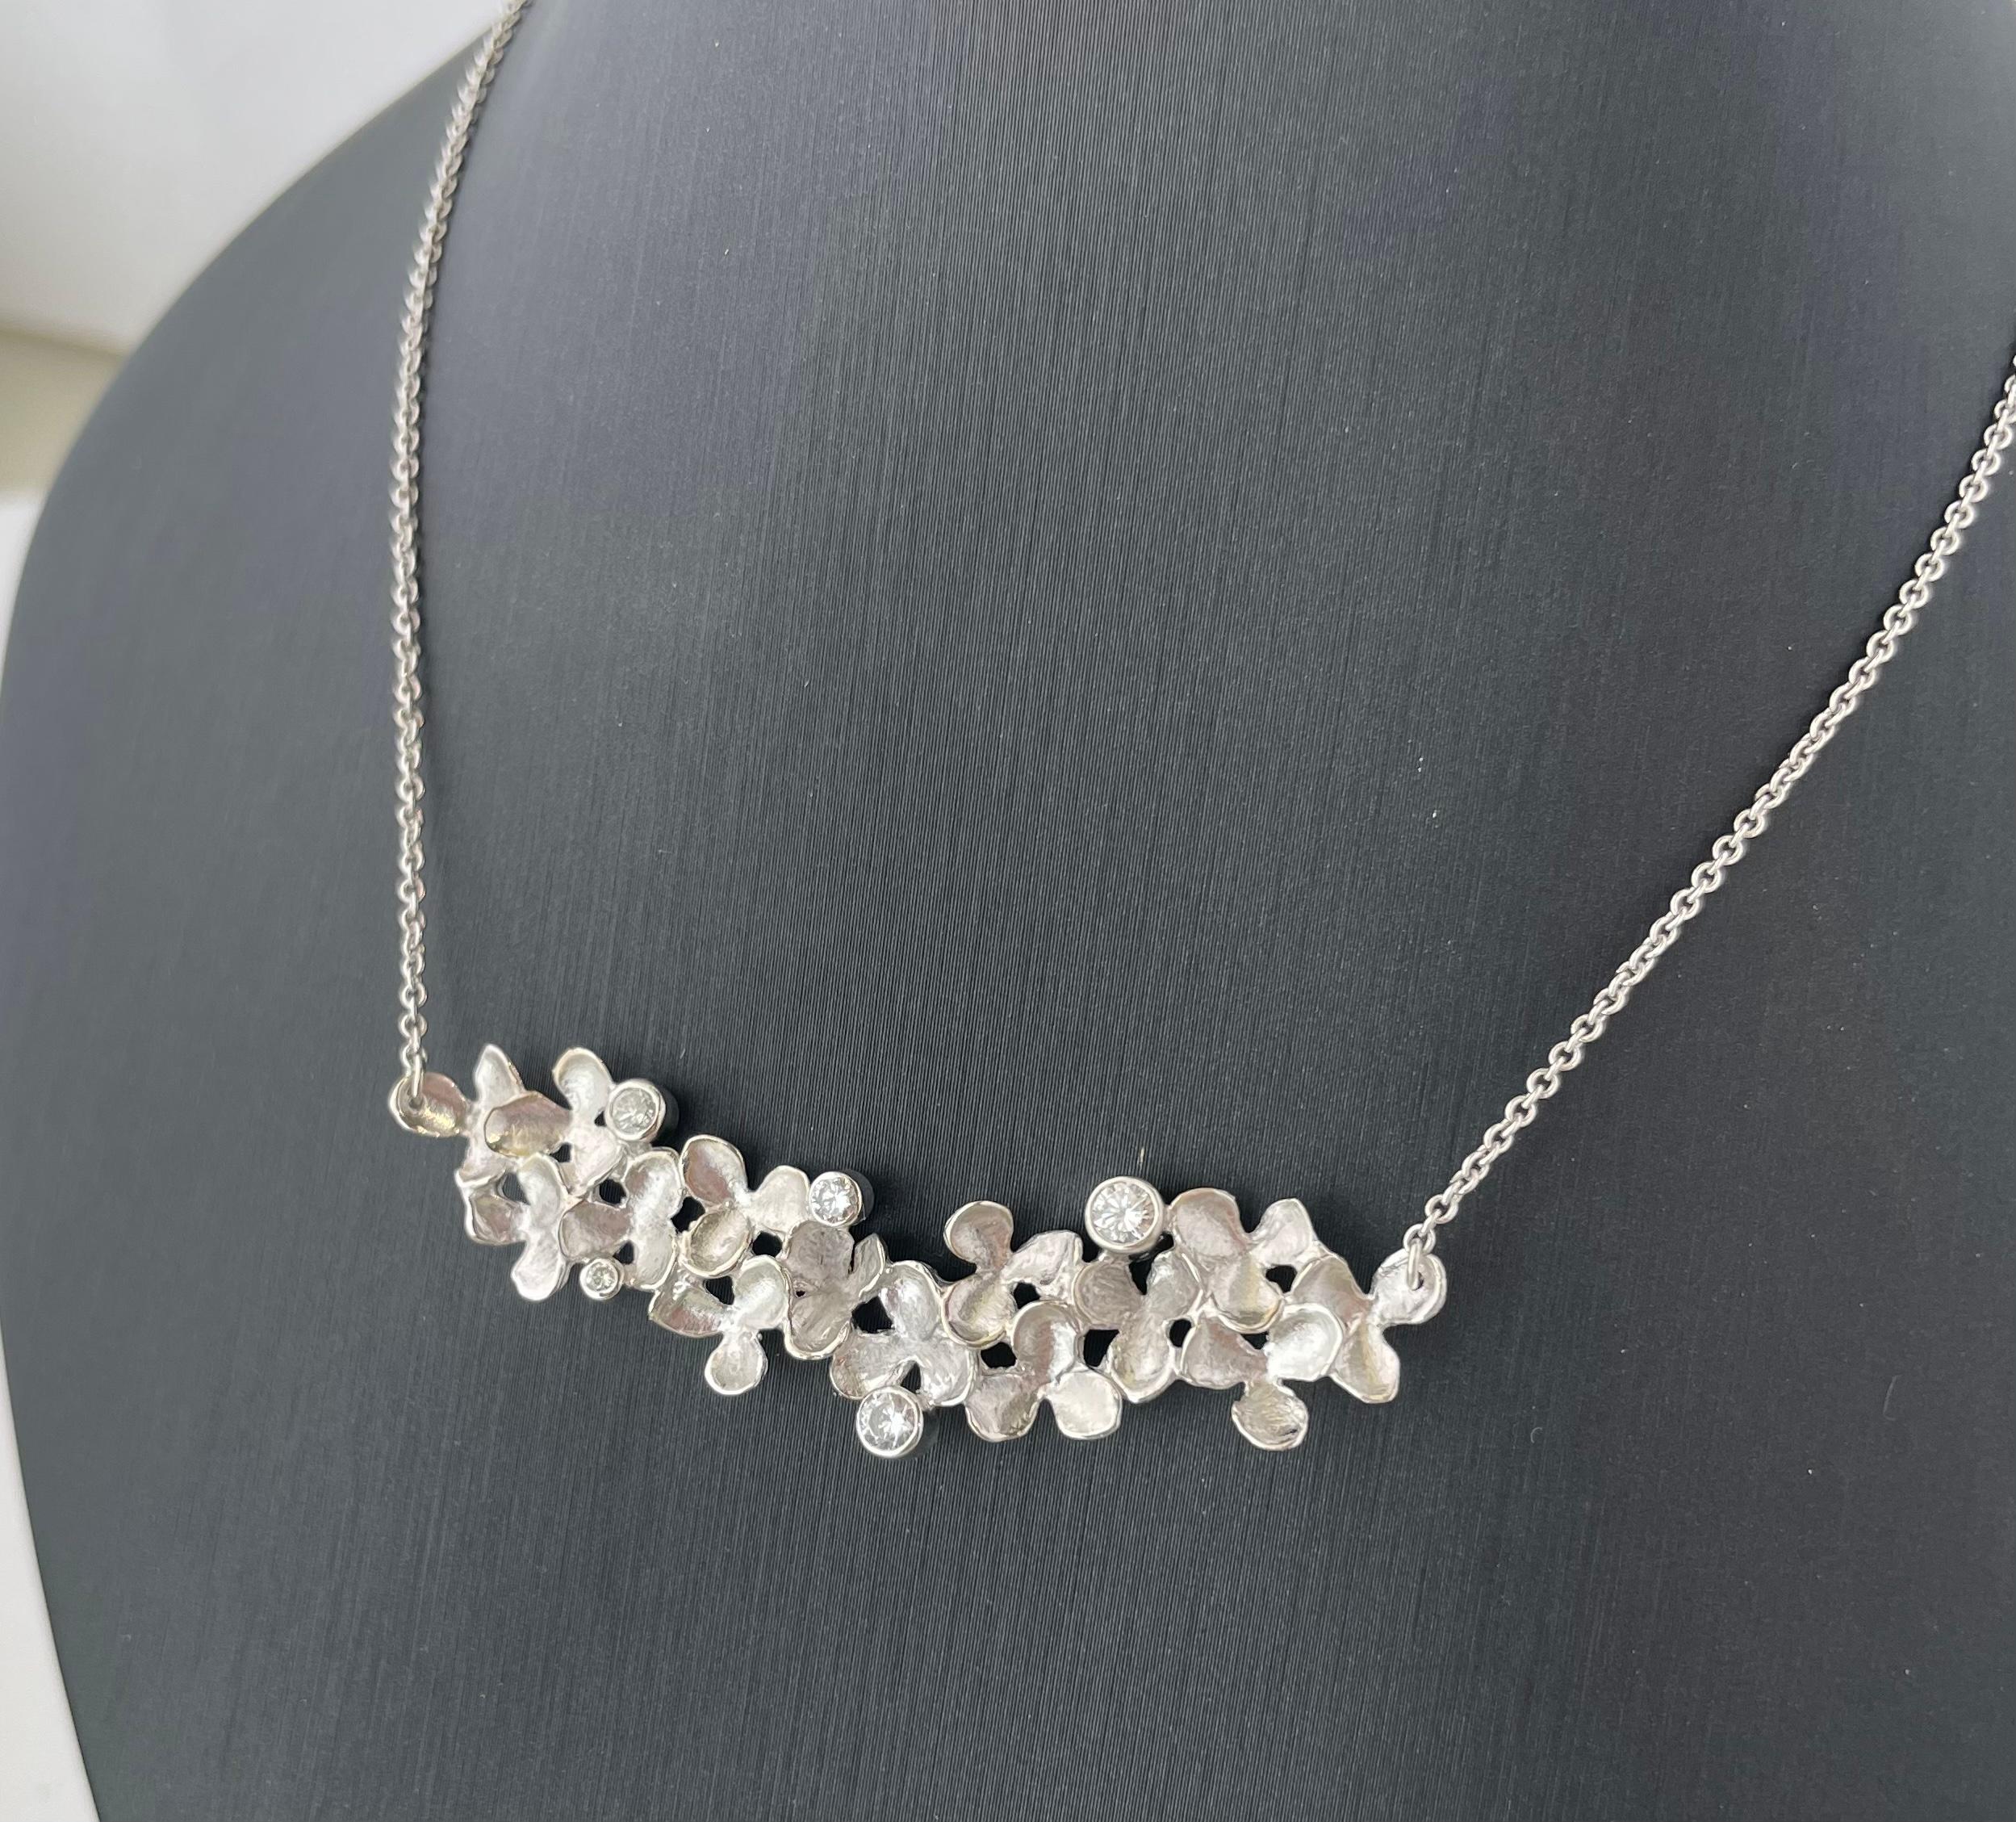 This flower bar pendant is part of InBloom Jewelry’s “Petal” collection. This collection combines inspiration from nature with technical trade skill to create a wearable work of art.

Inspired by new blooms in nature, this piece incorporates